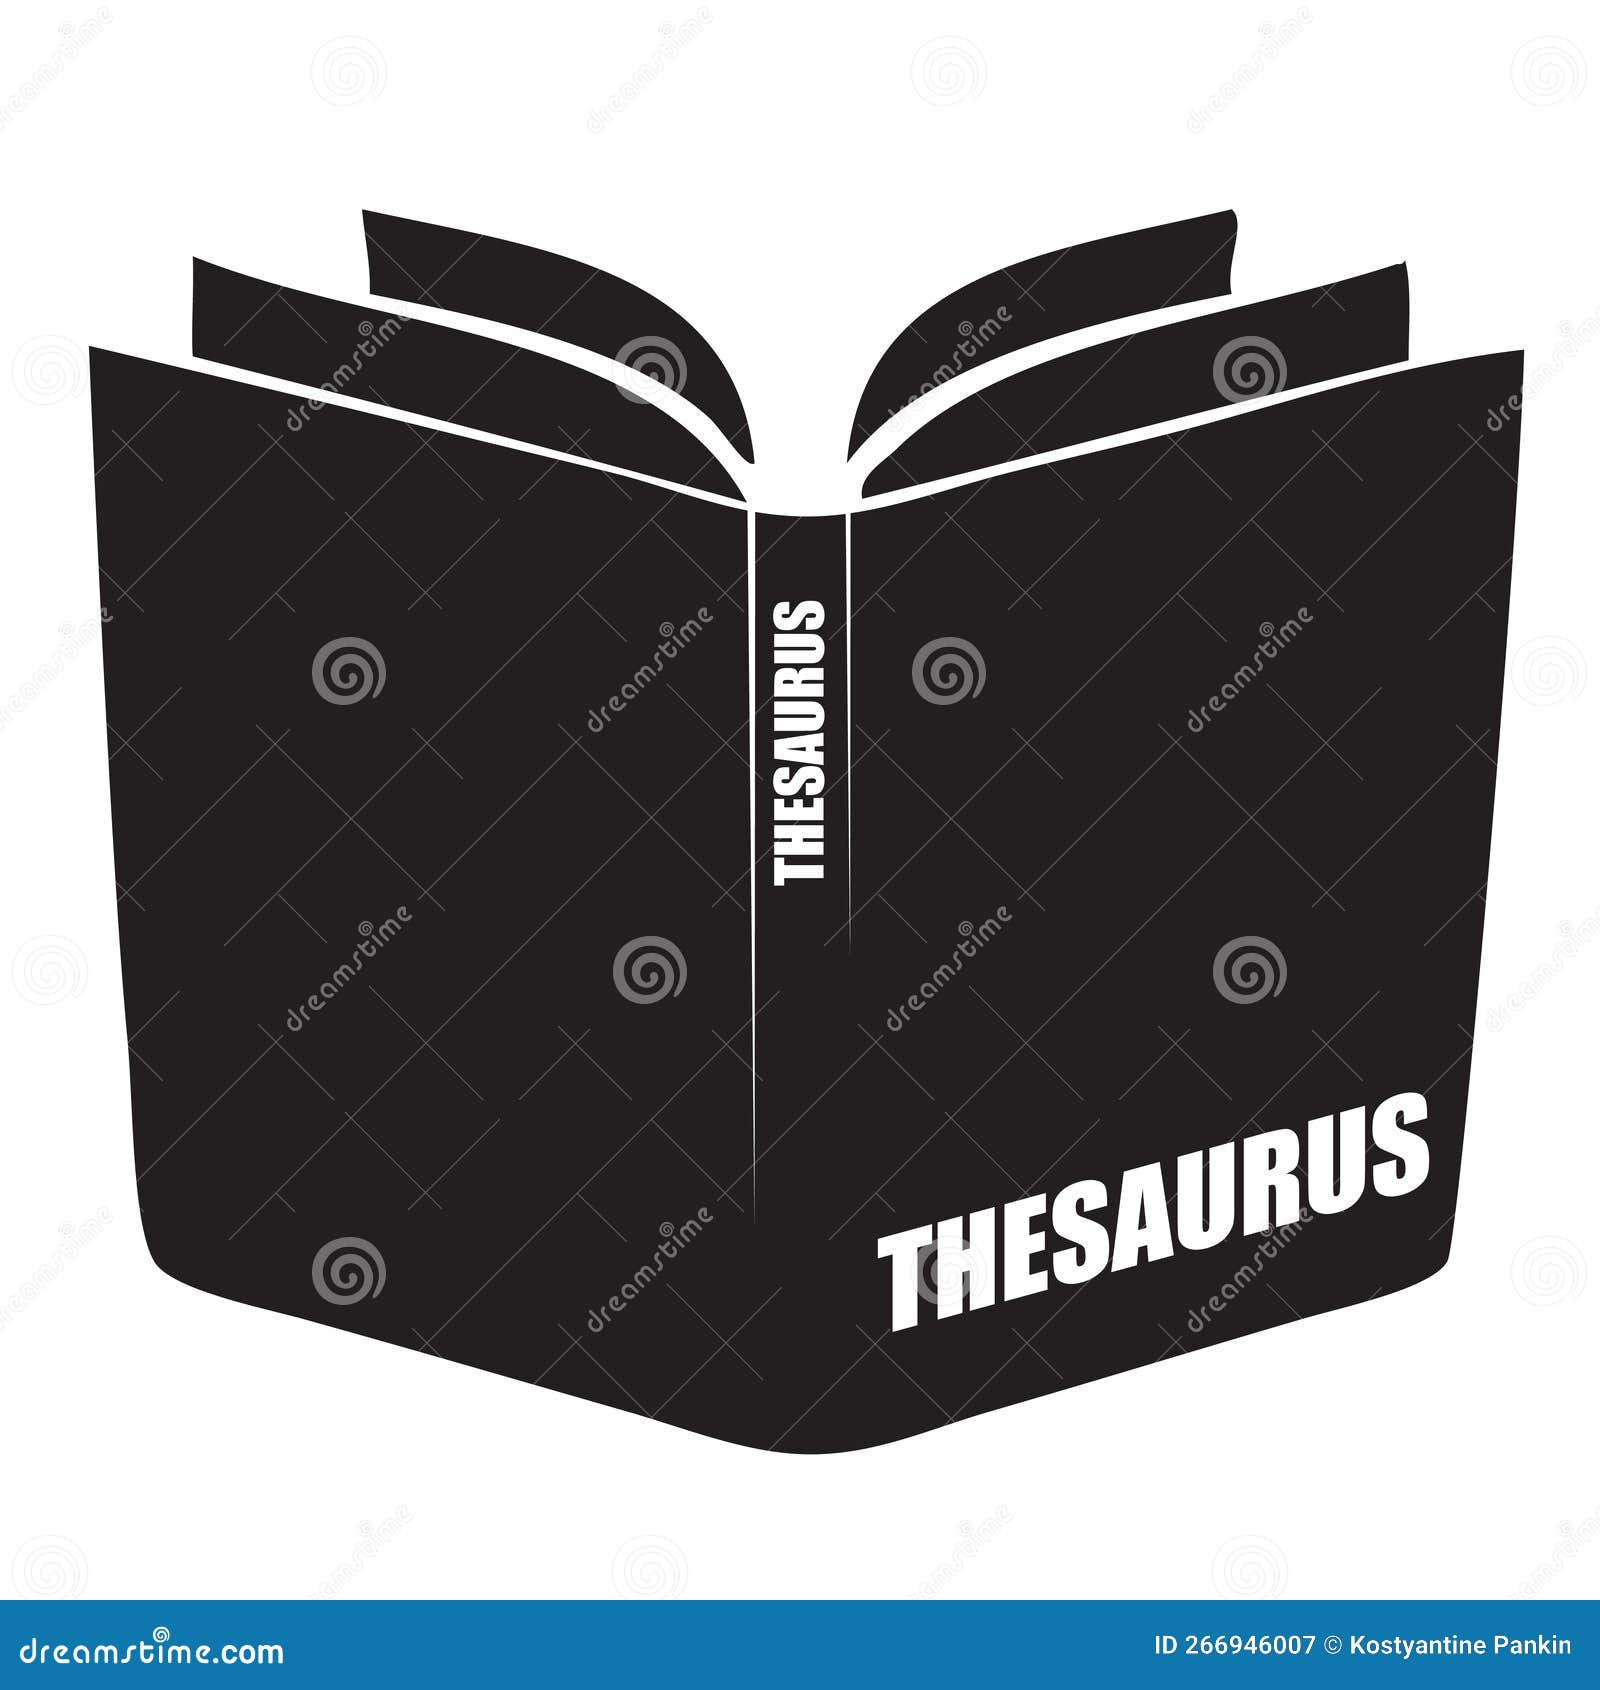 thesaurus - words with similar meaning